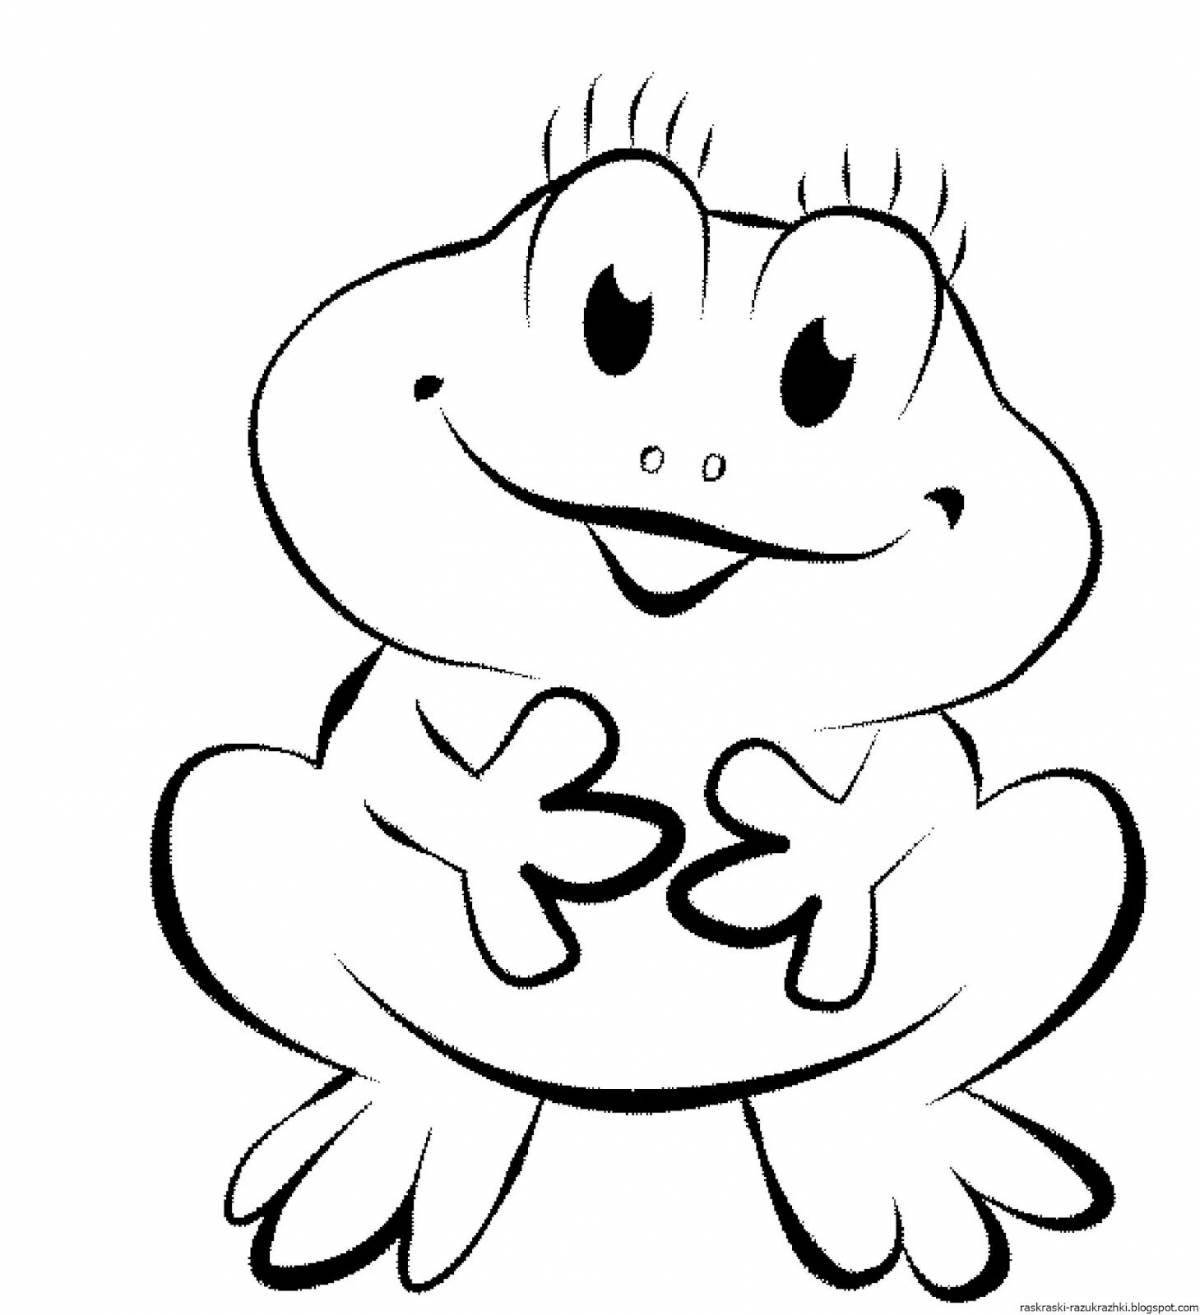 Adorable frog coloring book for 4-5 year olds